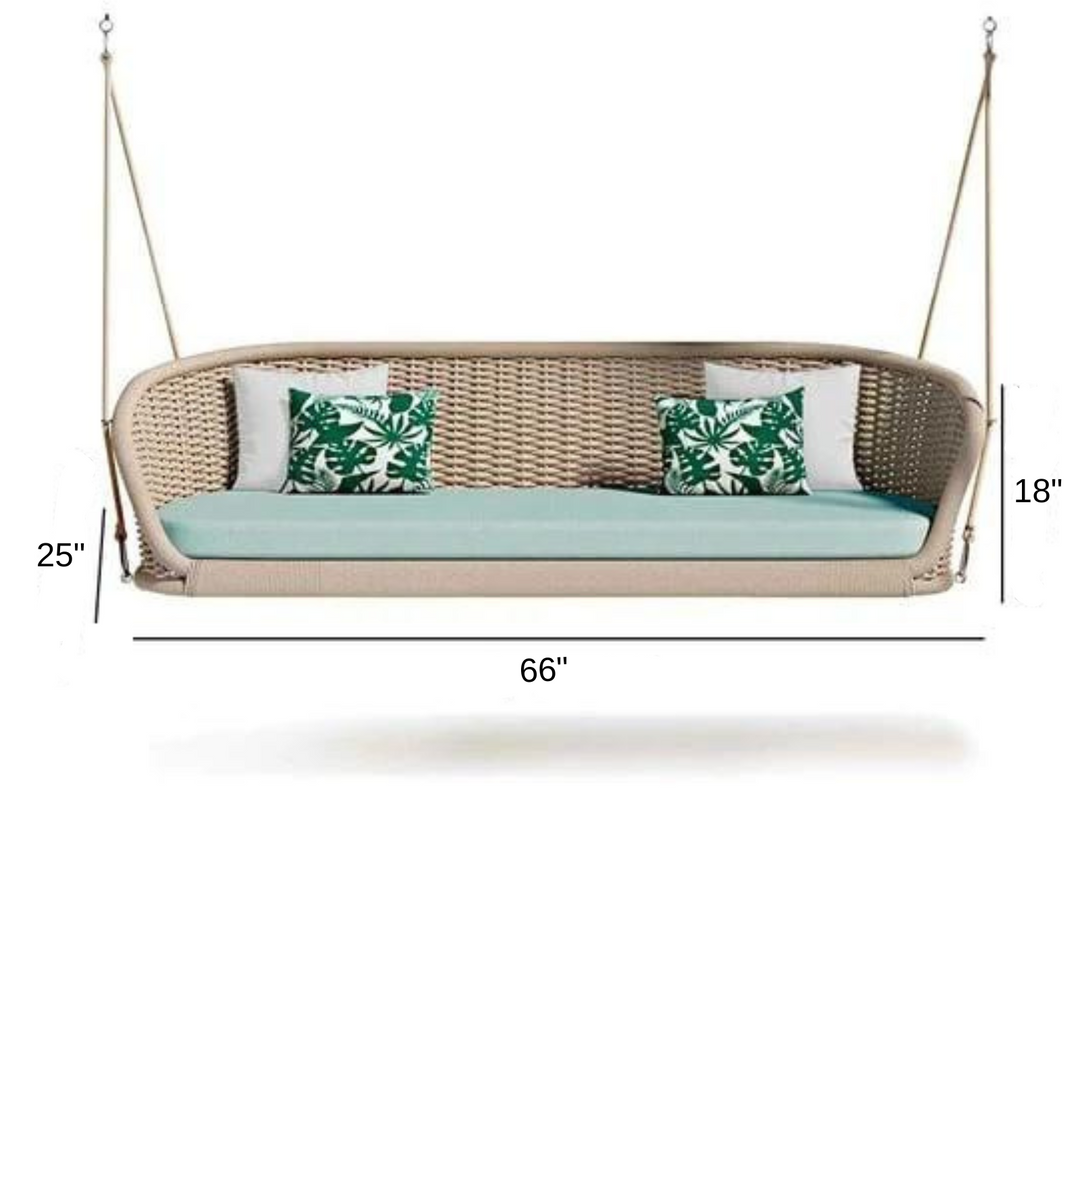 Furnico Three Seater Hanging Swing Without Stand For Balcony , Garden Swing (Cream)